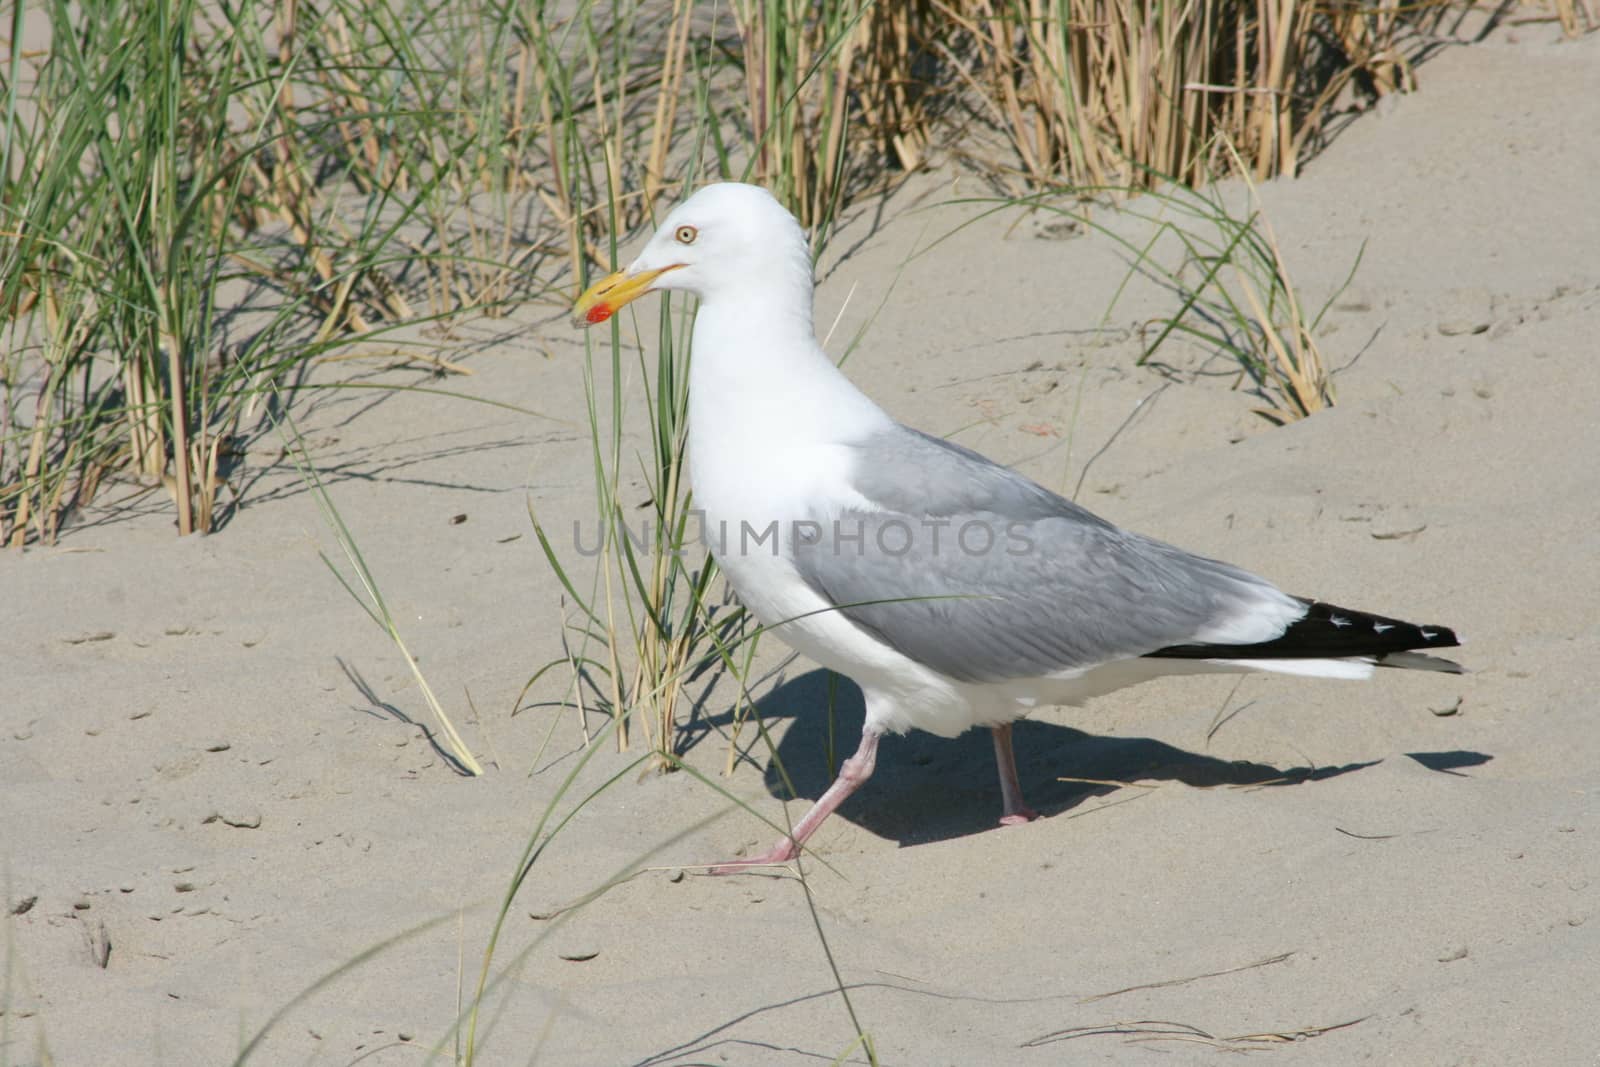 Close-up of a gull sitting on the sand